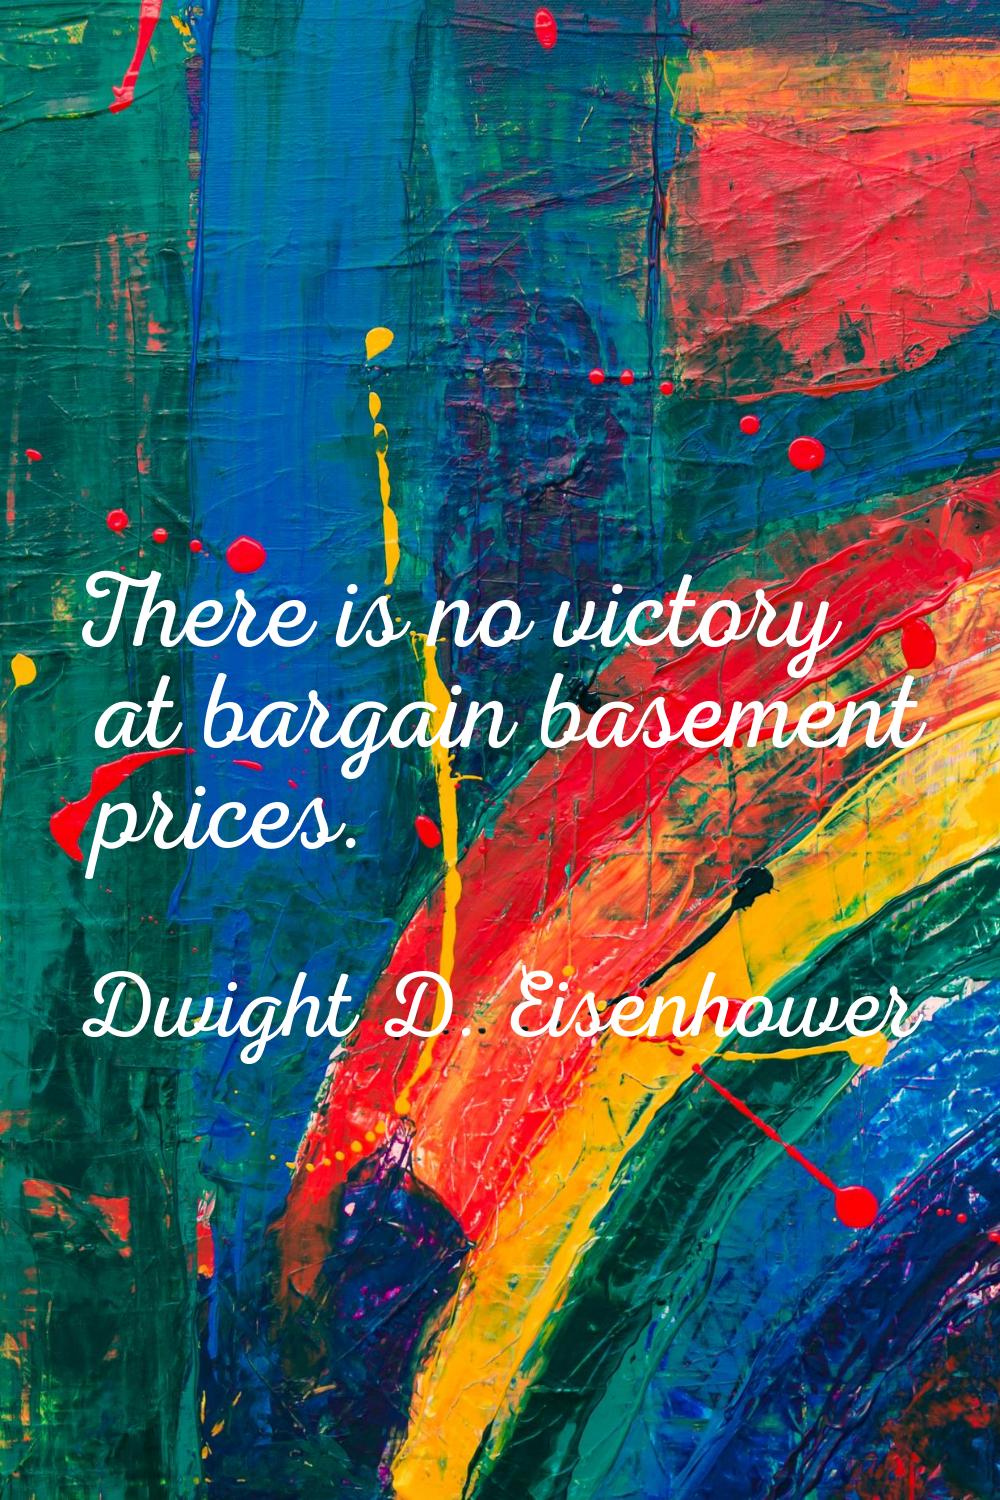 There is no victory at bargain basement prices.